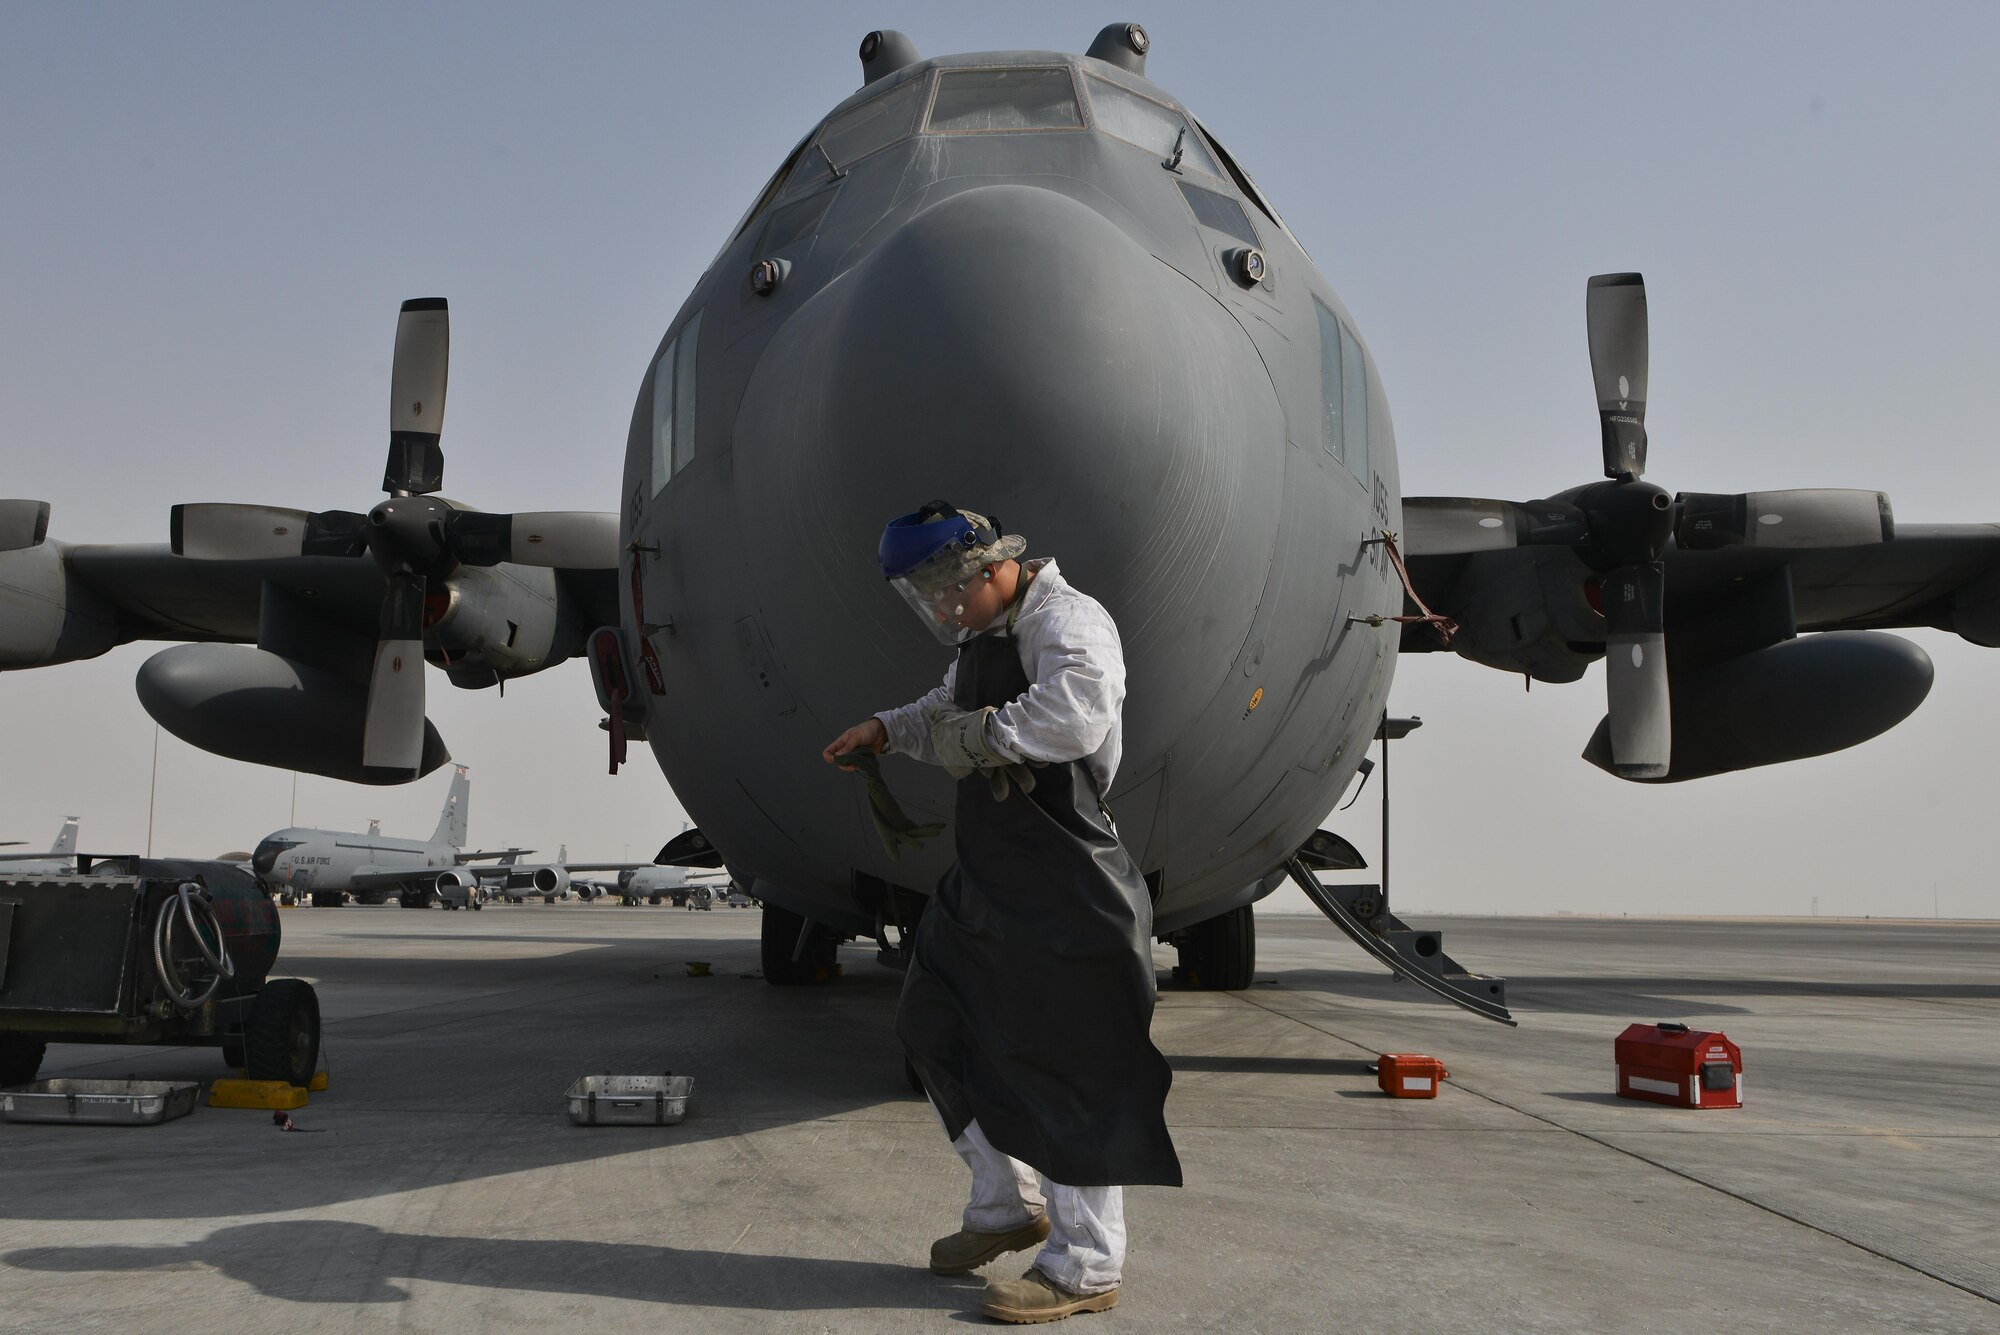 Senior Airman Matthew Krzywiecki, 379th Expeditionary Aircraft Maintenance Squadron, 746th Expeditionary Aircraft Maintenance Unit, puts on his personal protective equipment prior to working with liquid oxygen September 9, 2015 at Al Udeid Air Base, Qatar. The 746th AMU cryogenics airmen work with liquid nitrogen and liquid oxygen that is recharged into aircraft, providing aircrews with pure oxygen at altitude during missions in support of Operation Inherent Resolve. Krzywiecki is a deployed member from the 911th Airlift Wing, Pittsburgh International Airport Air Reserve Station, Pa. U.S. Air Force photo/Staff Sgt. Alexandre Montes)  